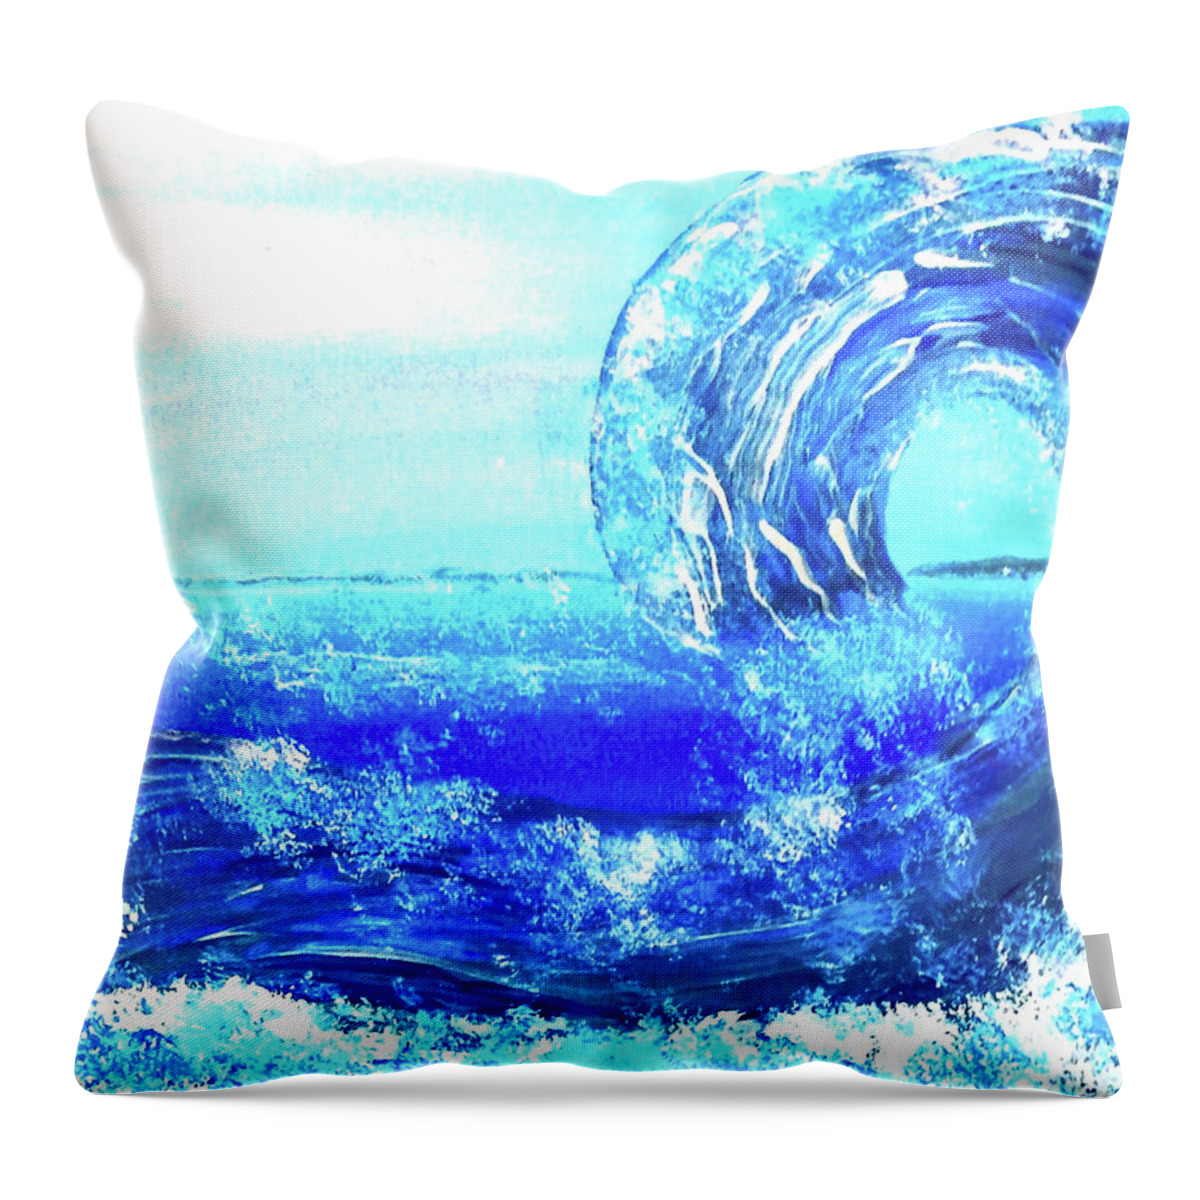 Blue Throw Pillow featuring the painting Big Bue Wave 2 by Anna Adams